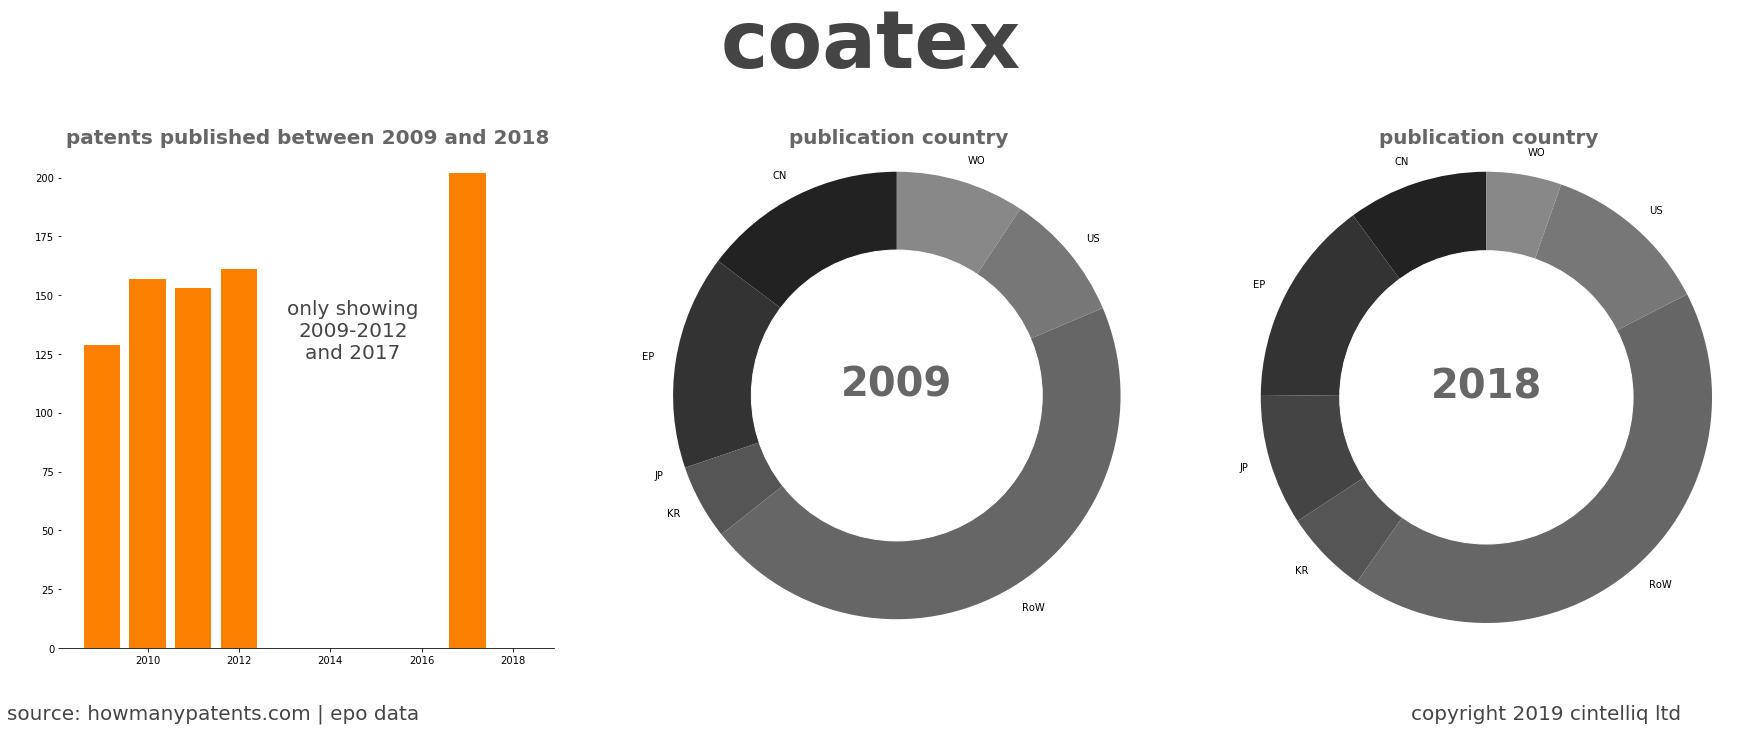 summary of patents for Coatex